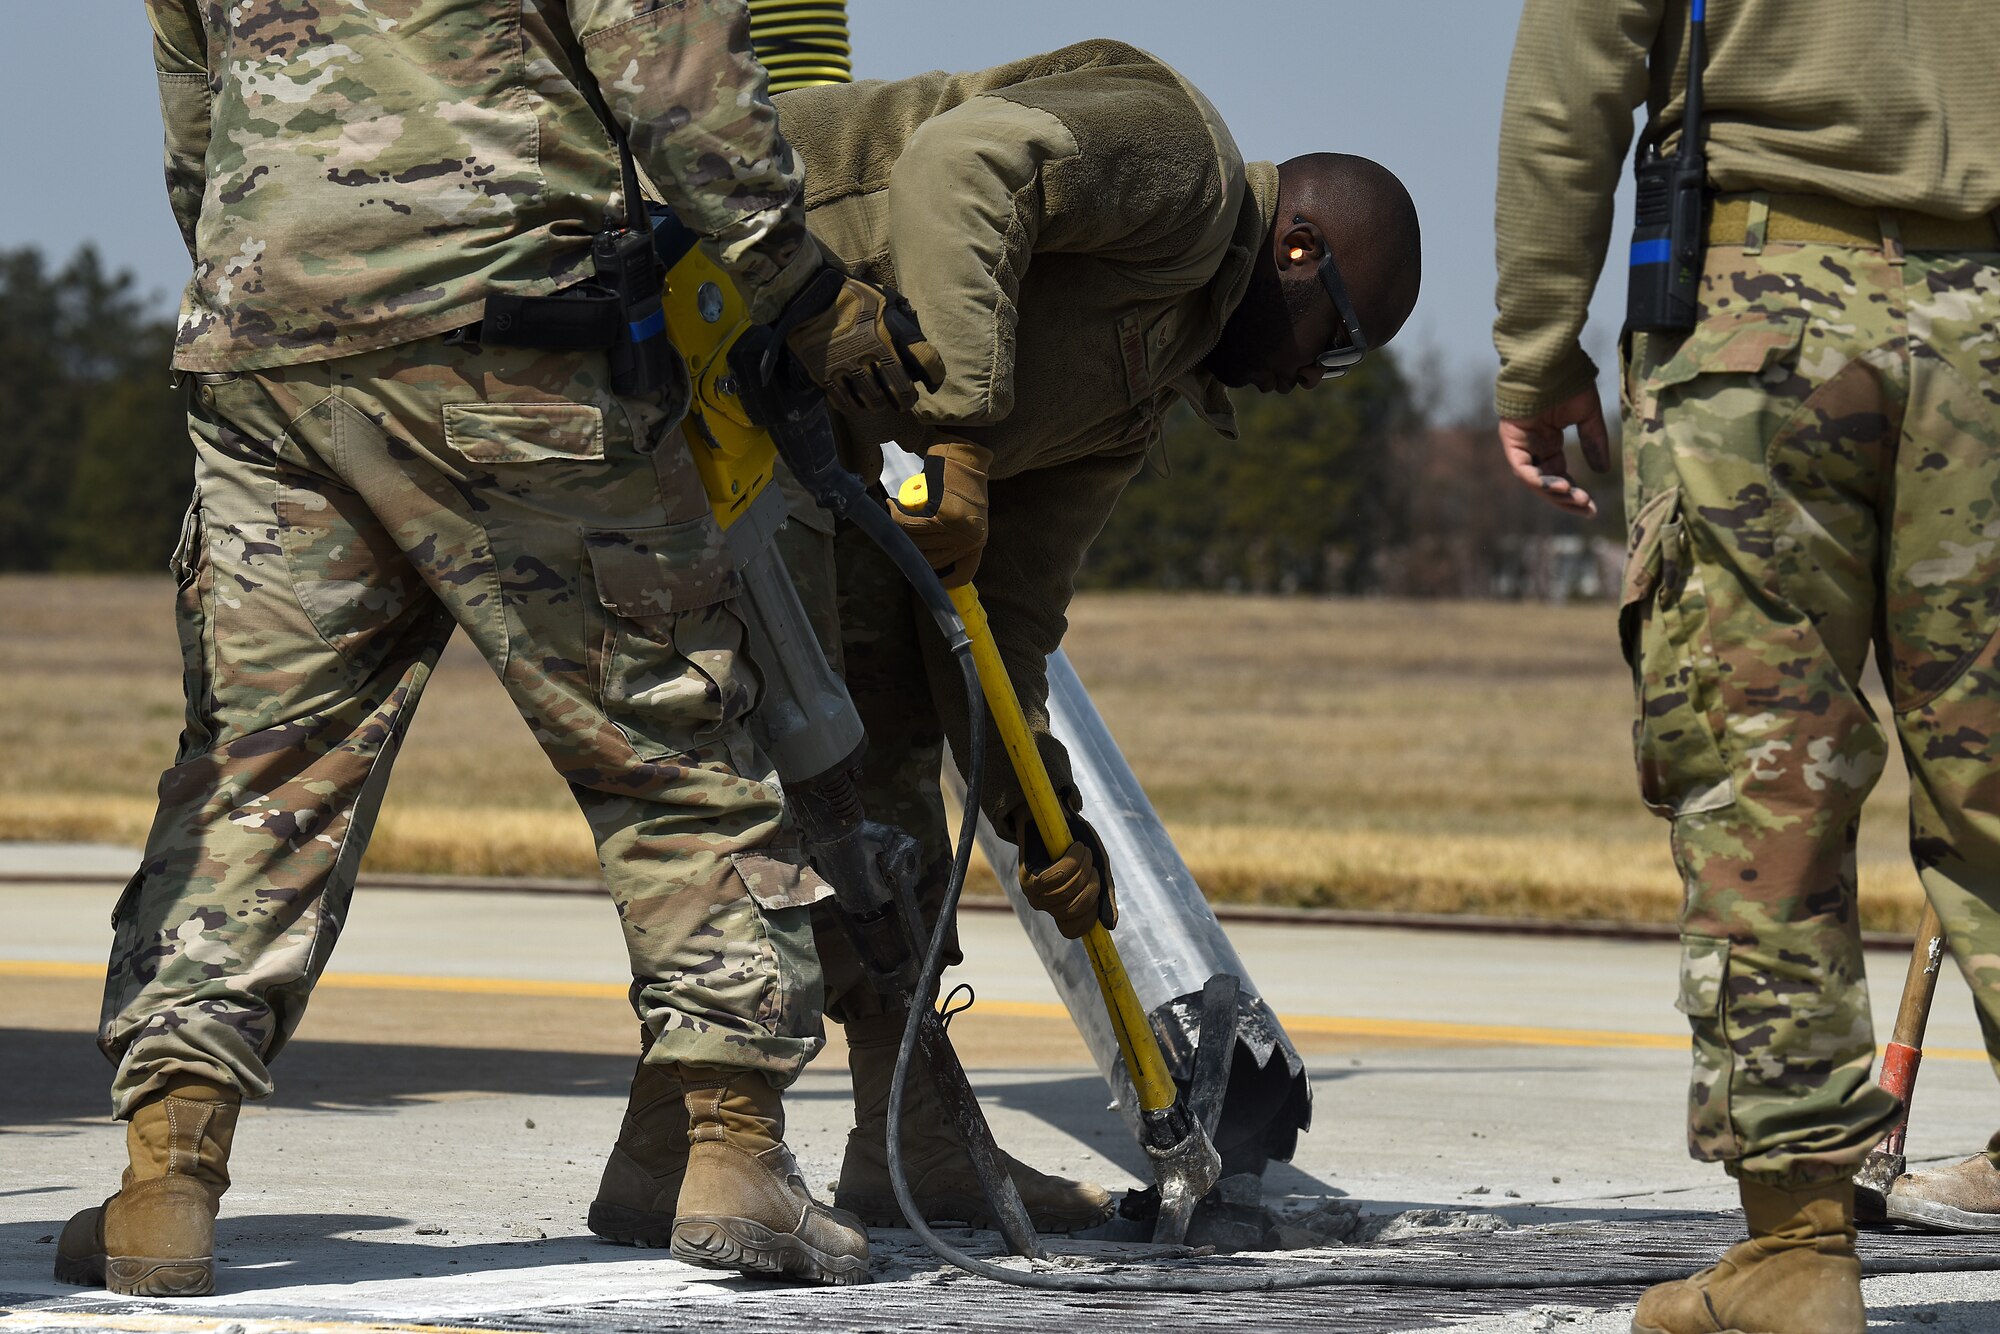 Senior Airman Manjel Faworaja, 8th Civil Engineer Squadron pavements and heavy equipment operator, uses a pick to break failed concrete on a taxiway at Kunsan Air Base, Republic of Korea, March 23, 2021. Pavements and heavy equipment operators are able to construct runways and airfields in remote global locations. (U.S. Air Force photo by Senior Airman Suzie Plotnikov)